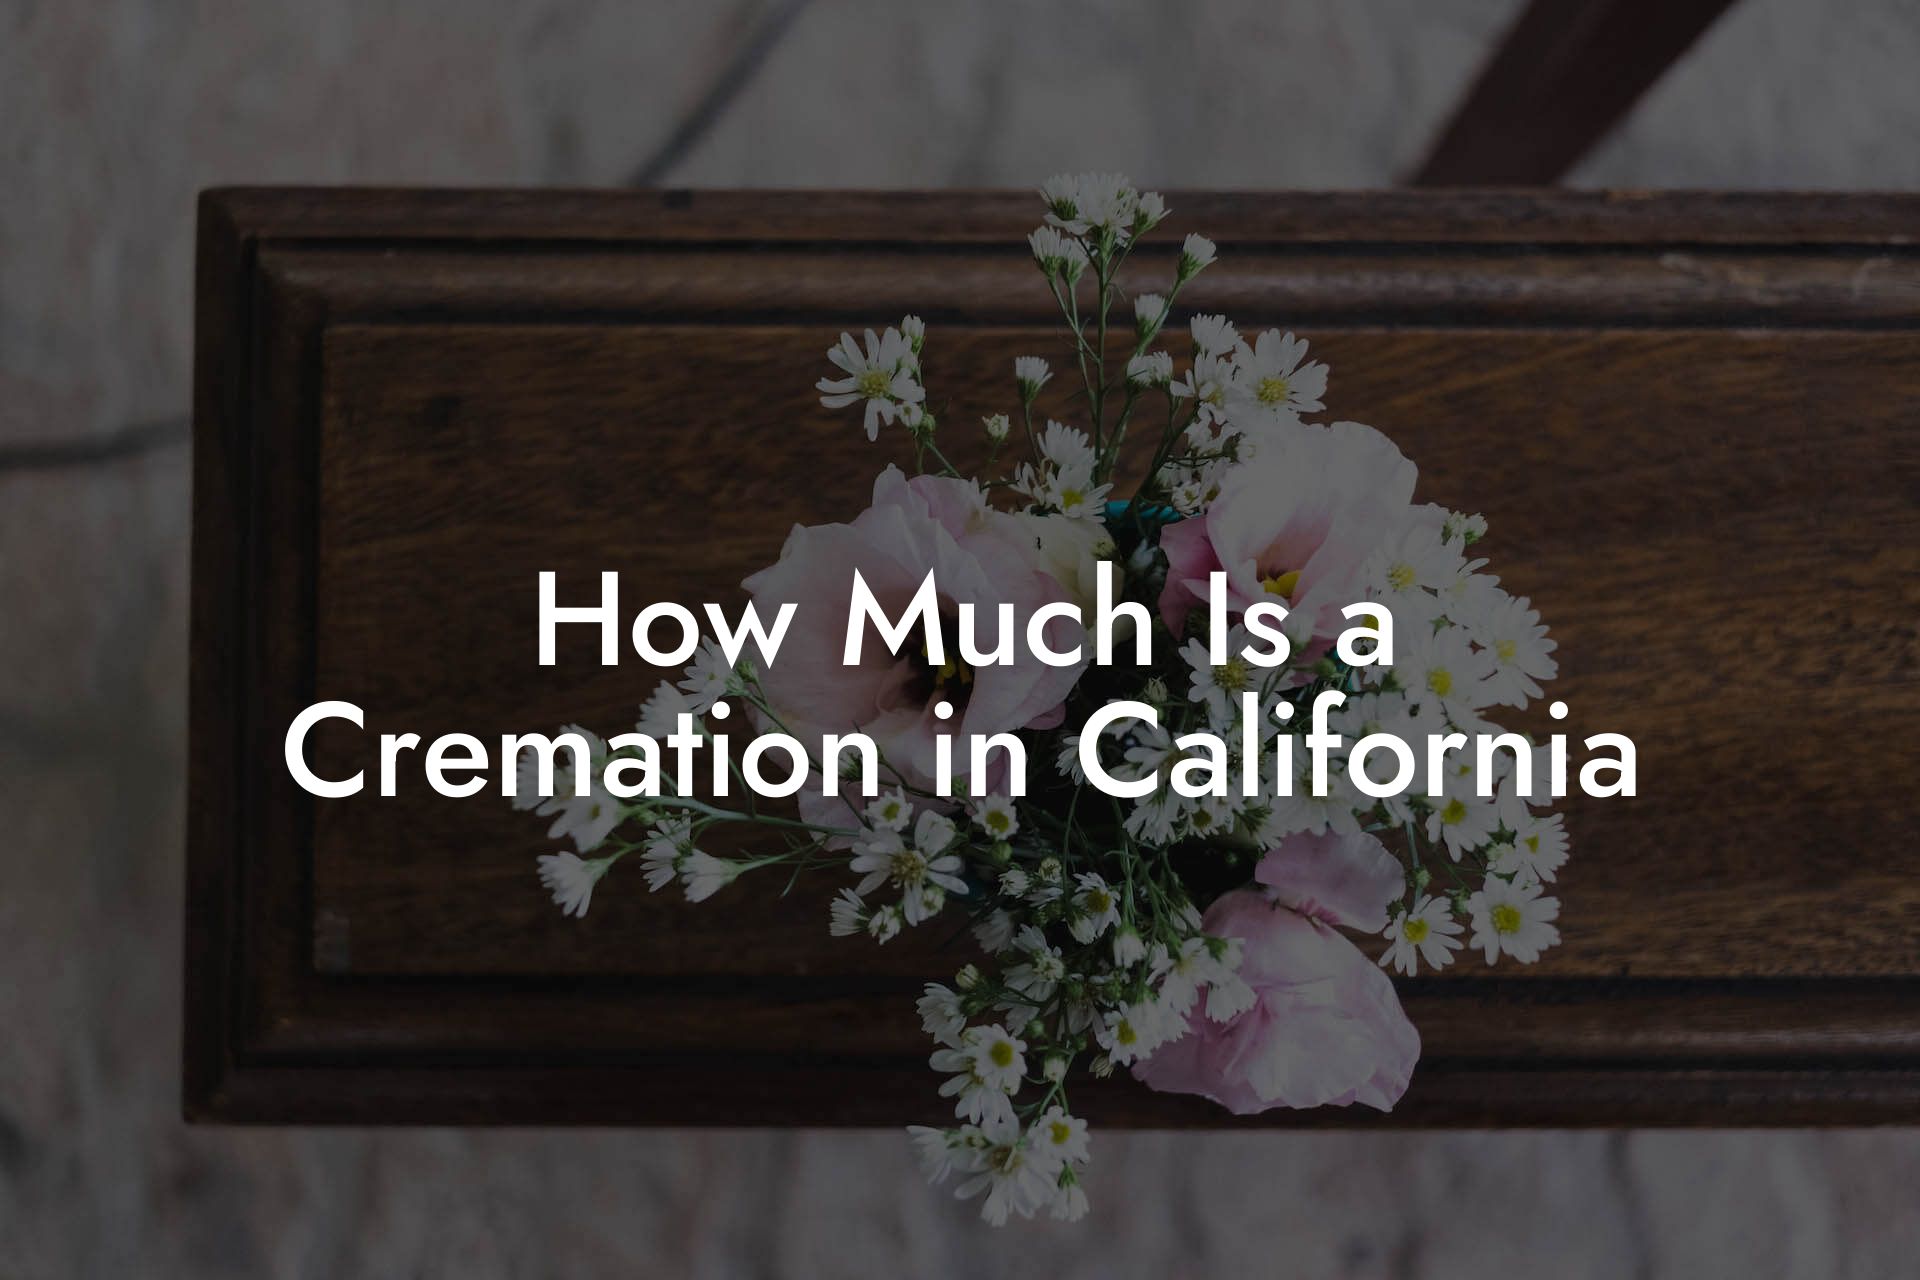 How Much Is a Cremation in California